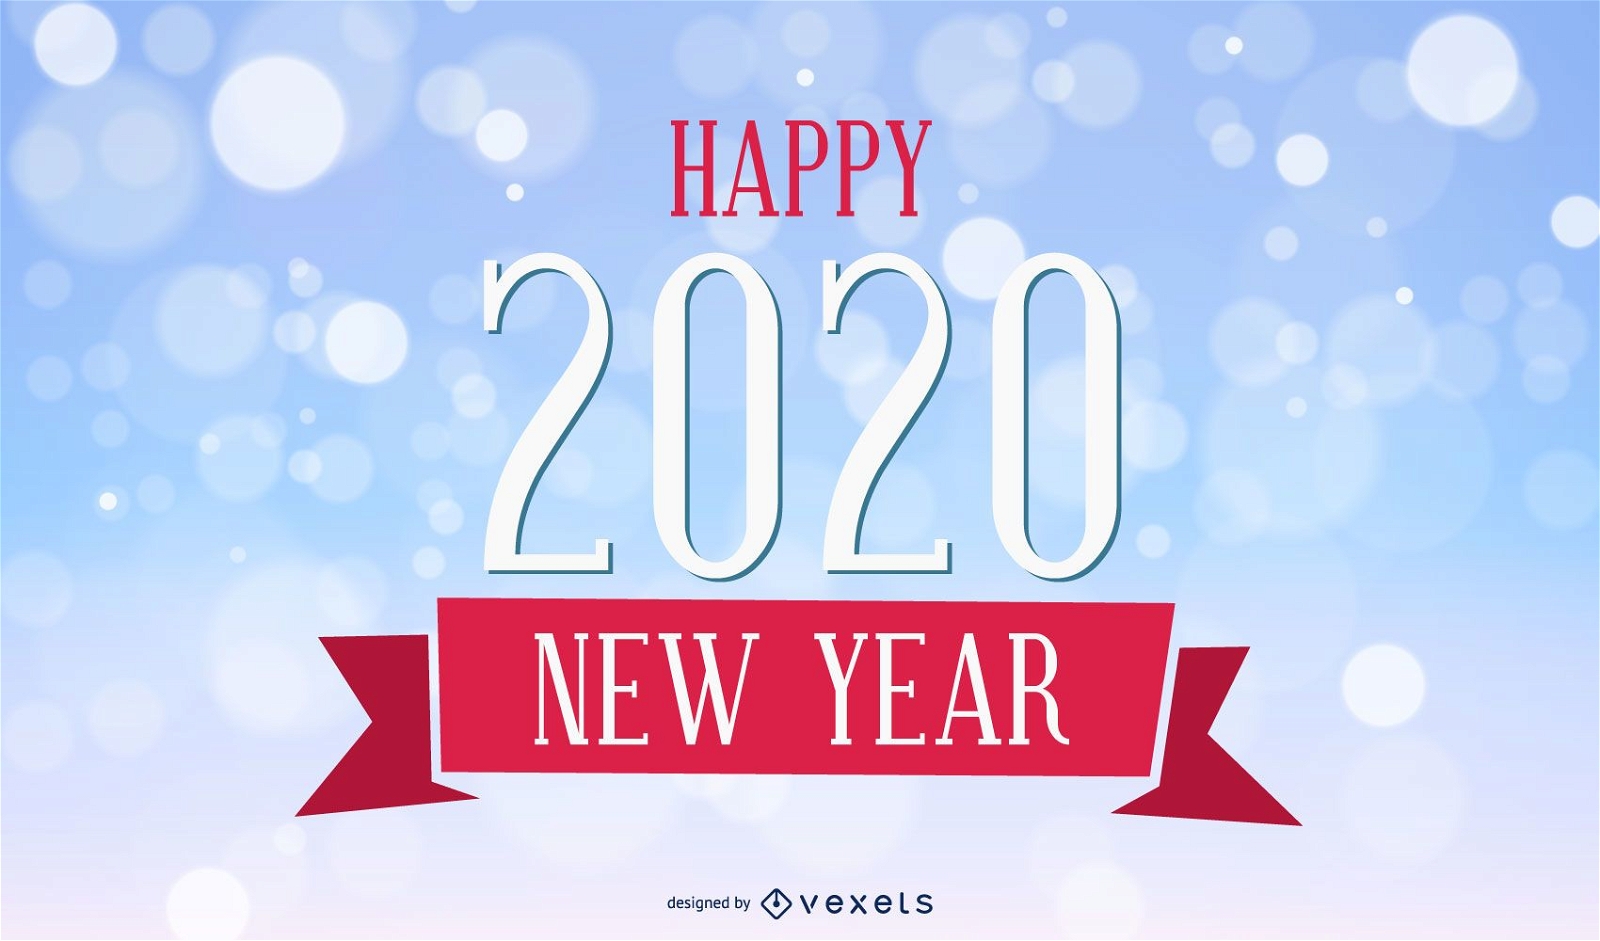 2020 Vintage New Year Card on Bokeh Background